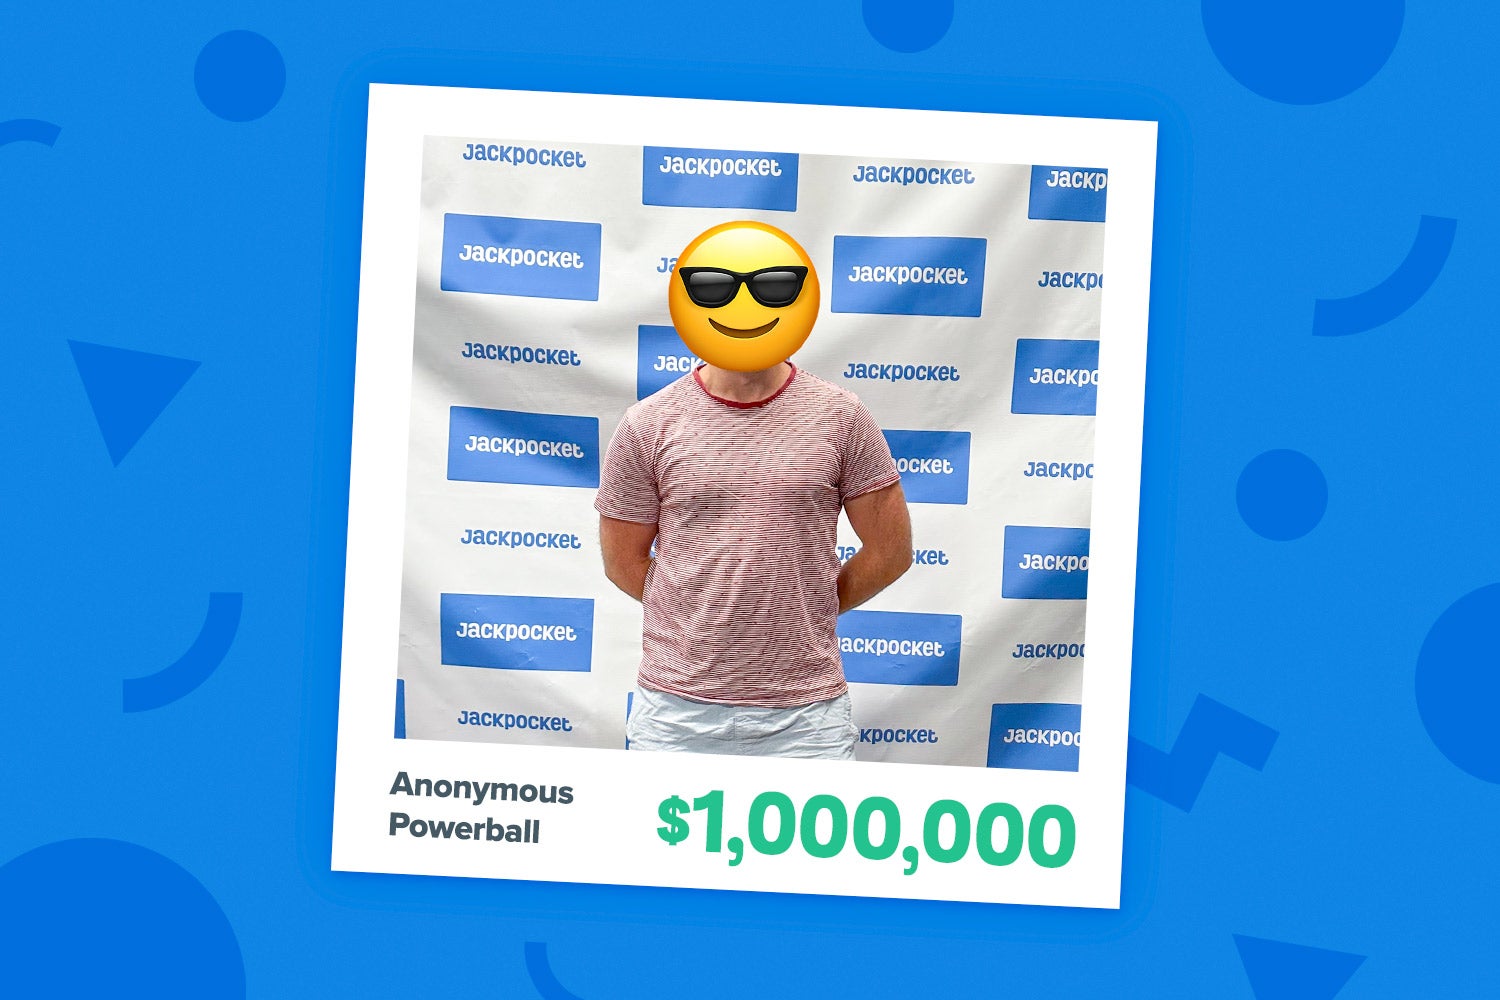 Ohio Man Wins $1,000,000 And Becomes Jackpocket's 30th Millionaire